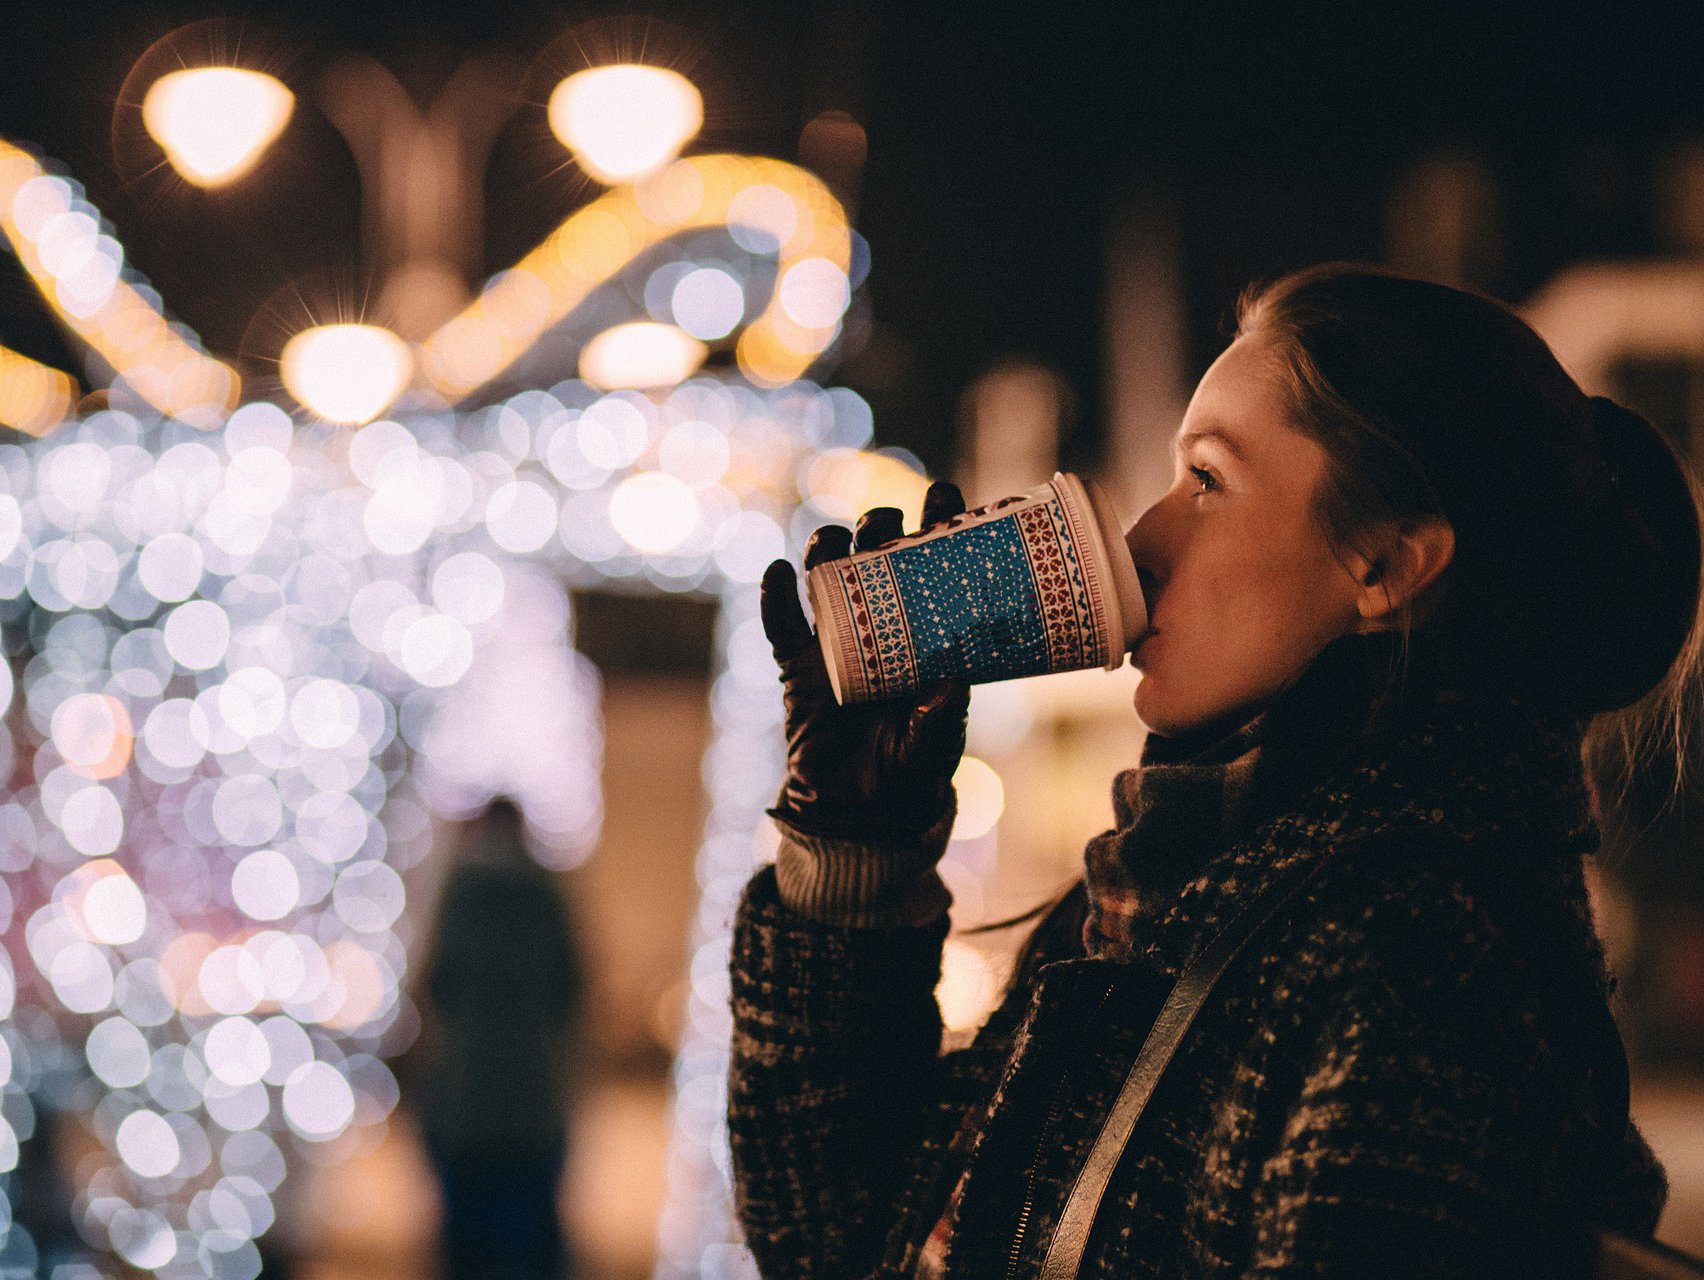 Woman drinking hot chocolate outside at night during Christmas time.